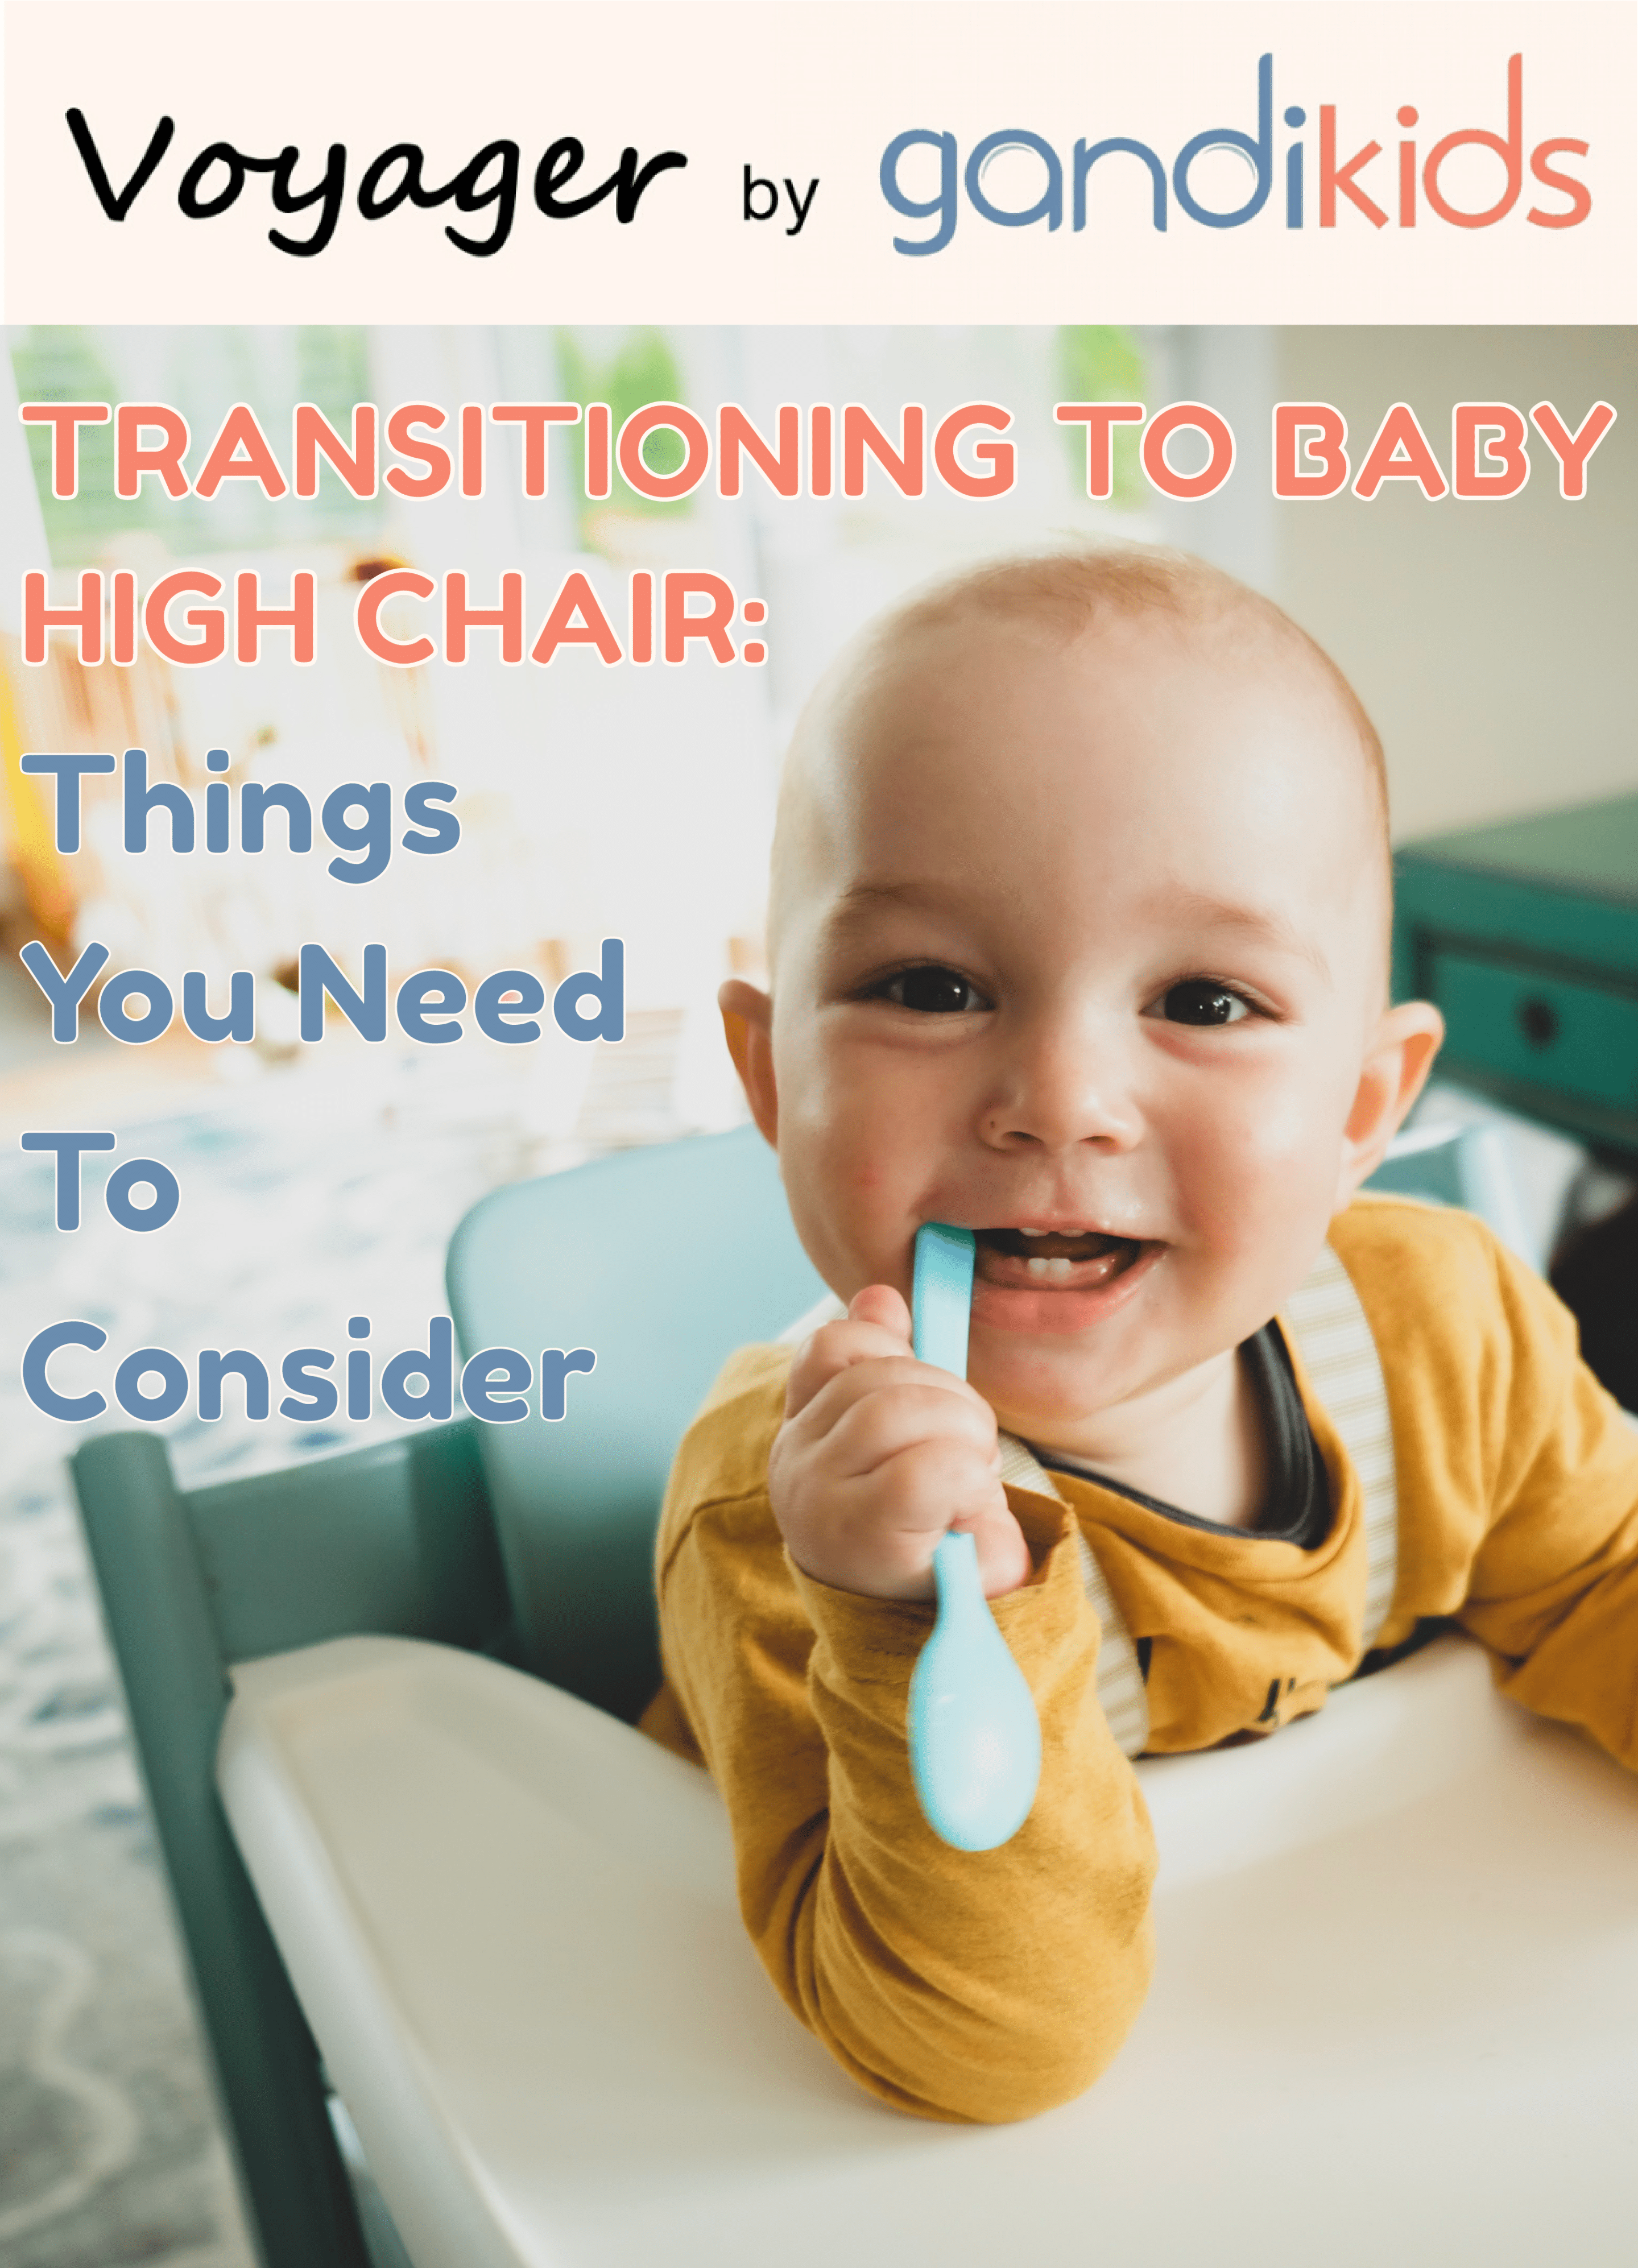 When to Start Using High Chair